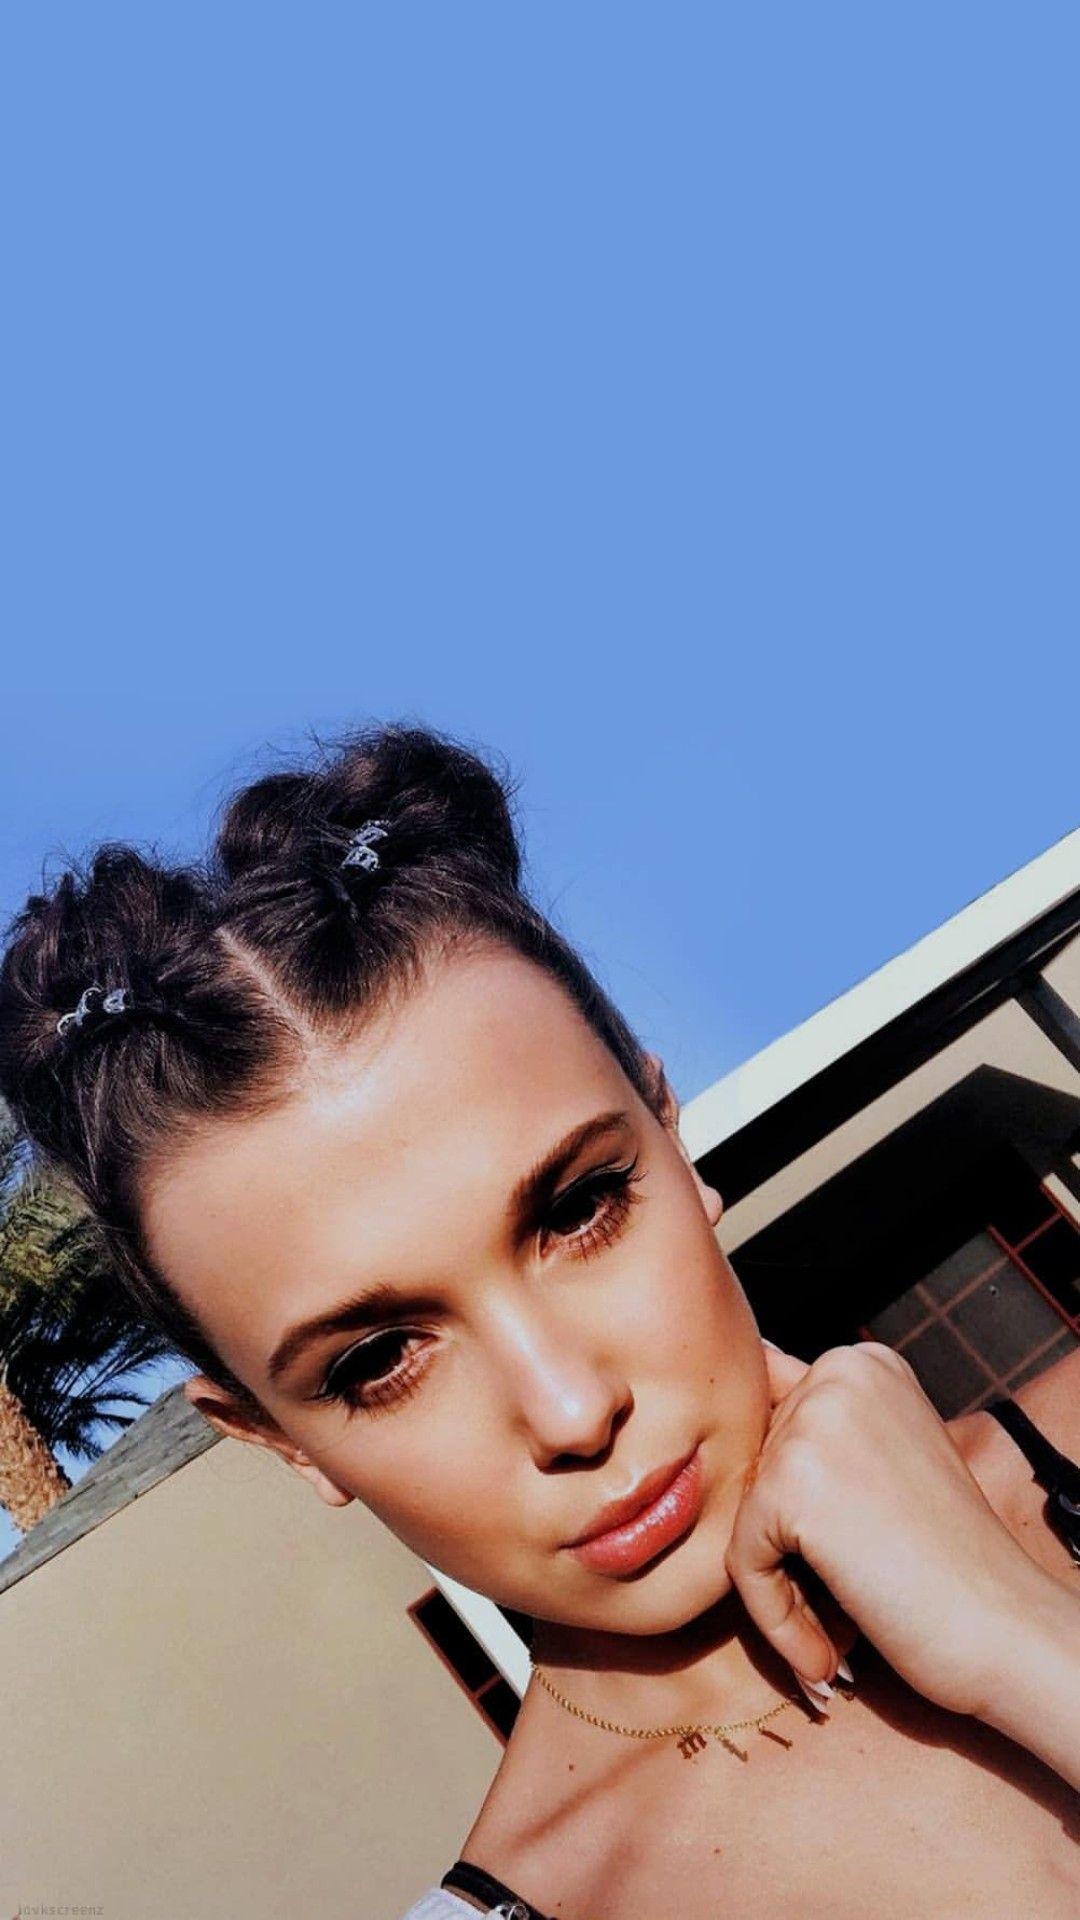 Millie Bobby Brown Wallpapers